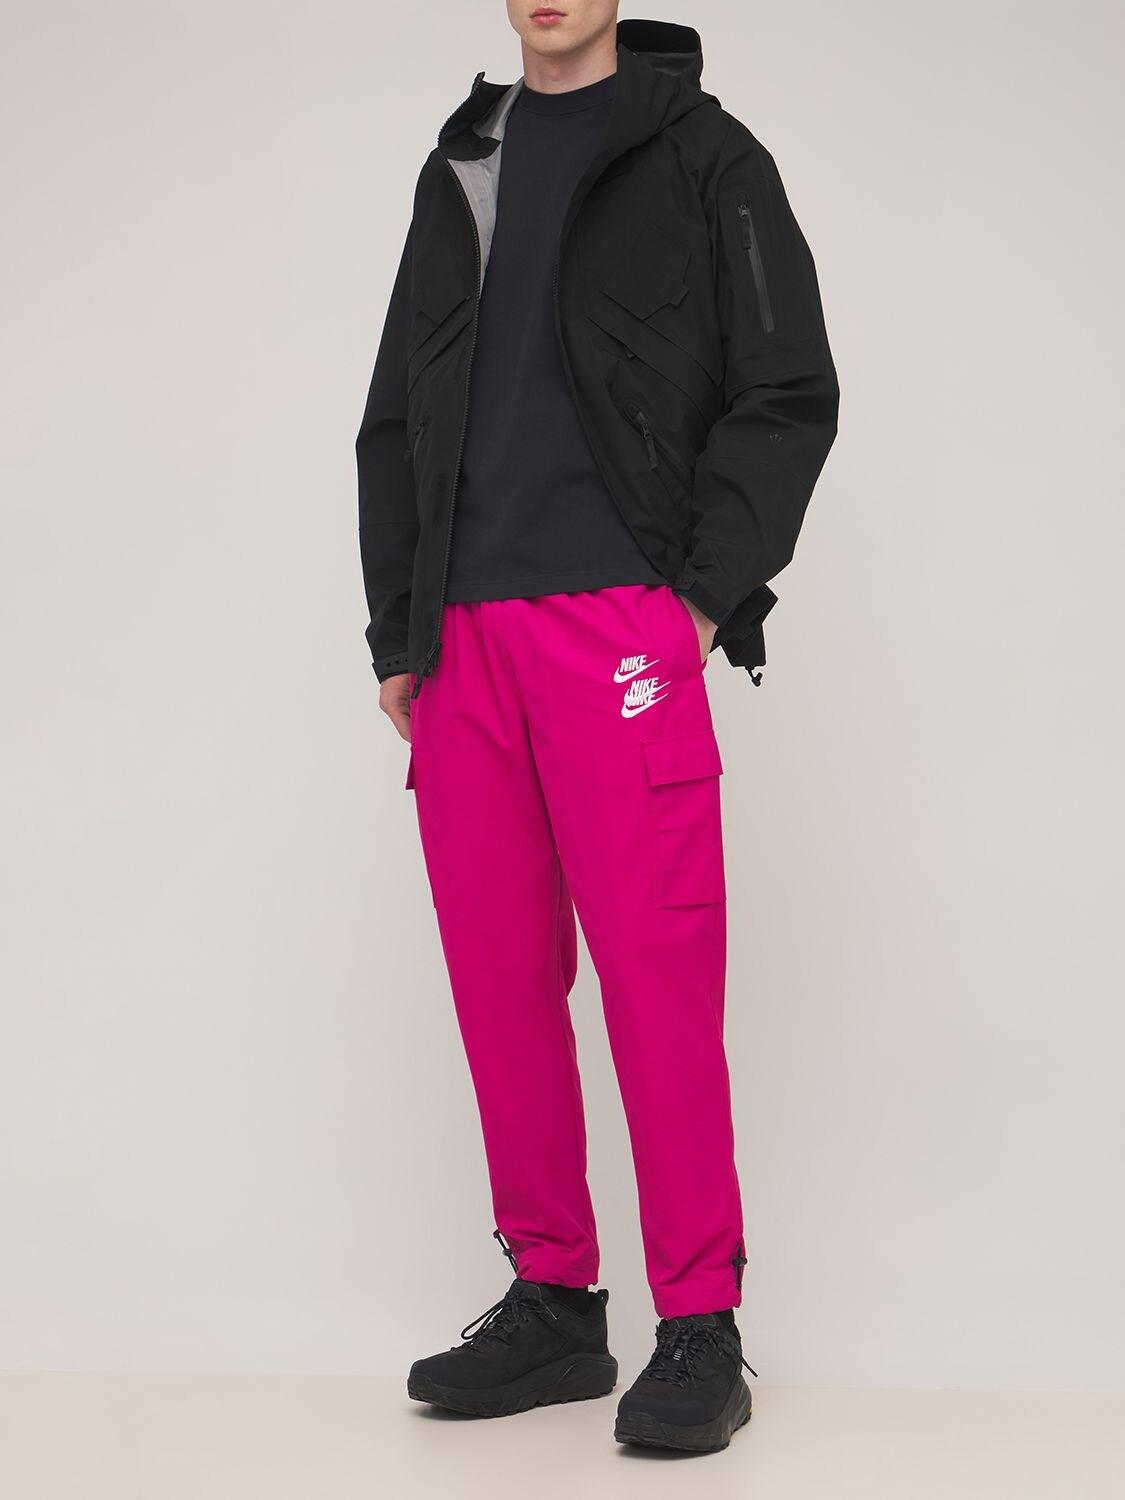 Nike World Tour Woven Cargo Pants in Pink for Men